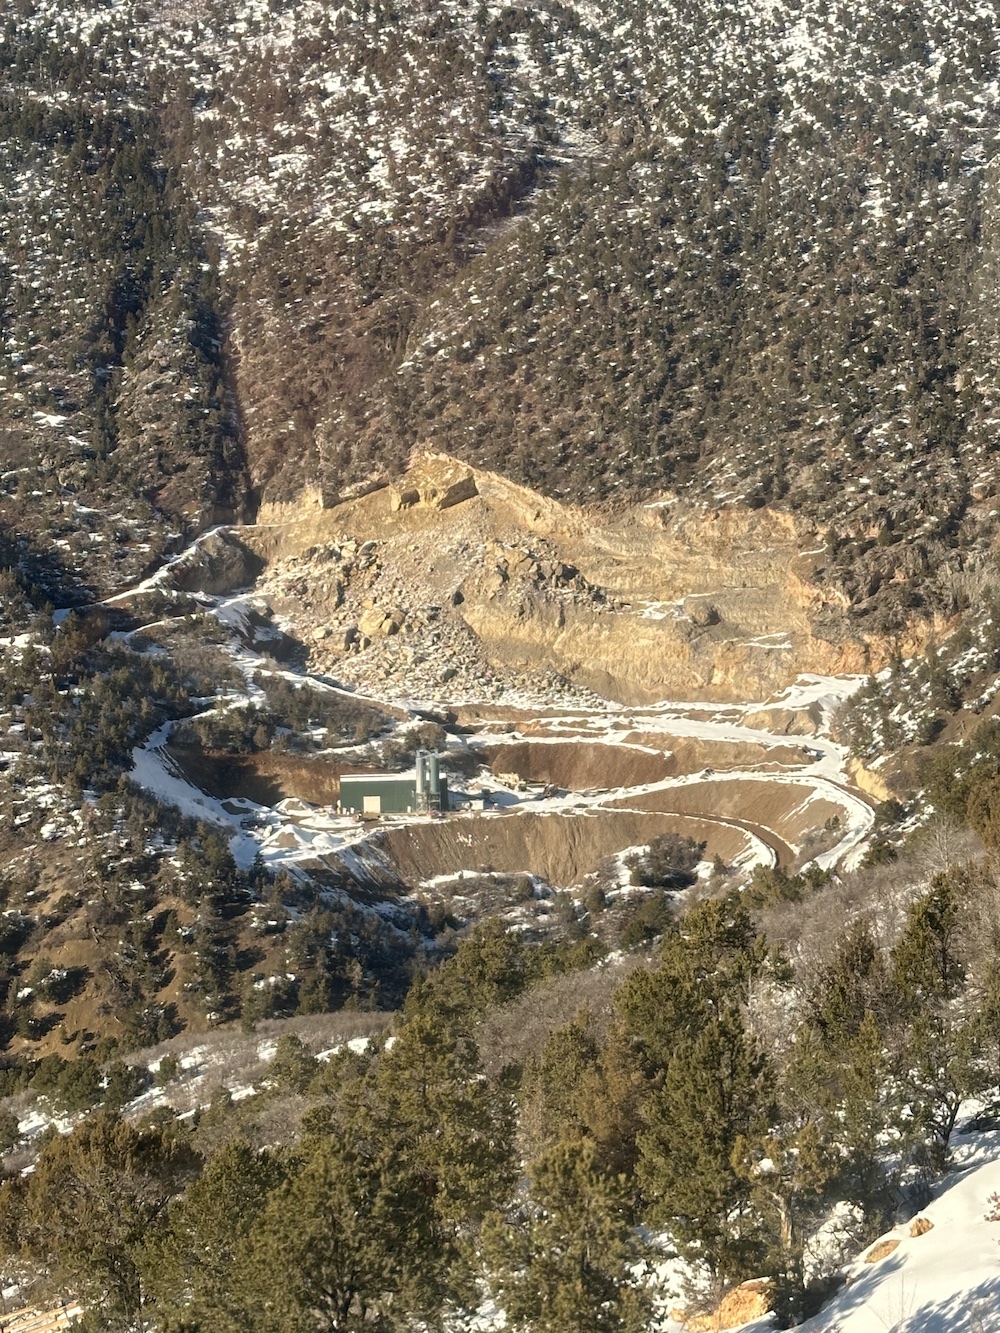 View of the limestone quarry from the Glenwood Caverns tramway.